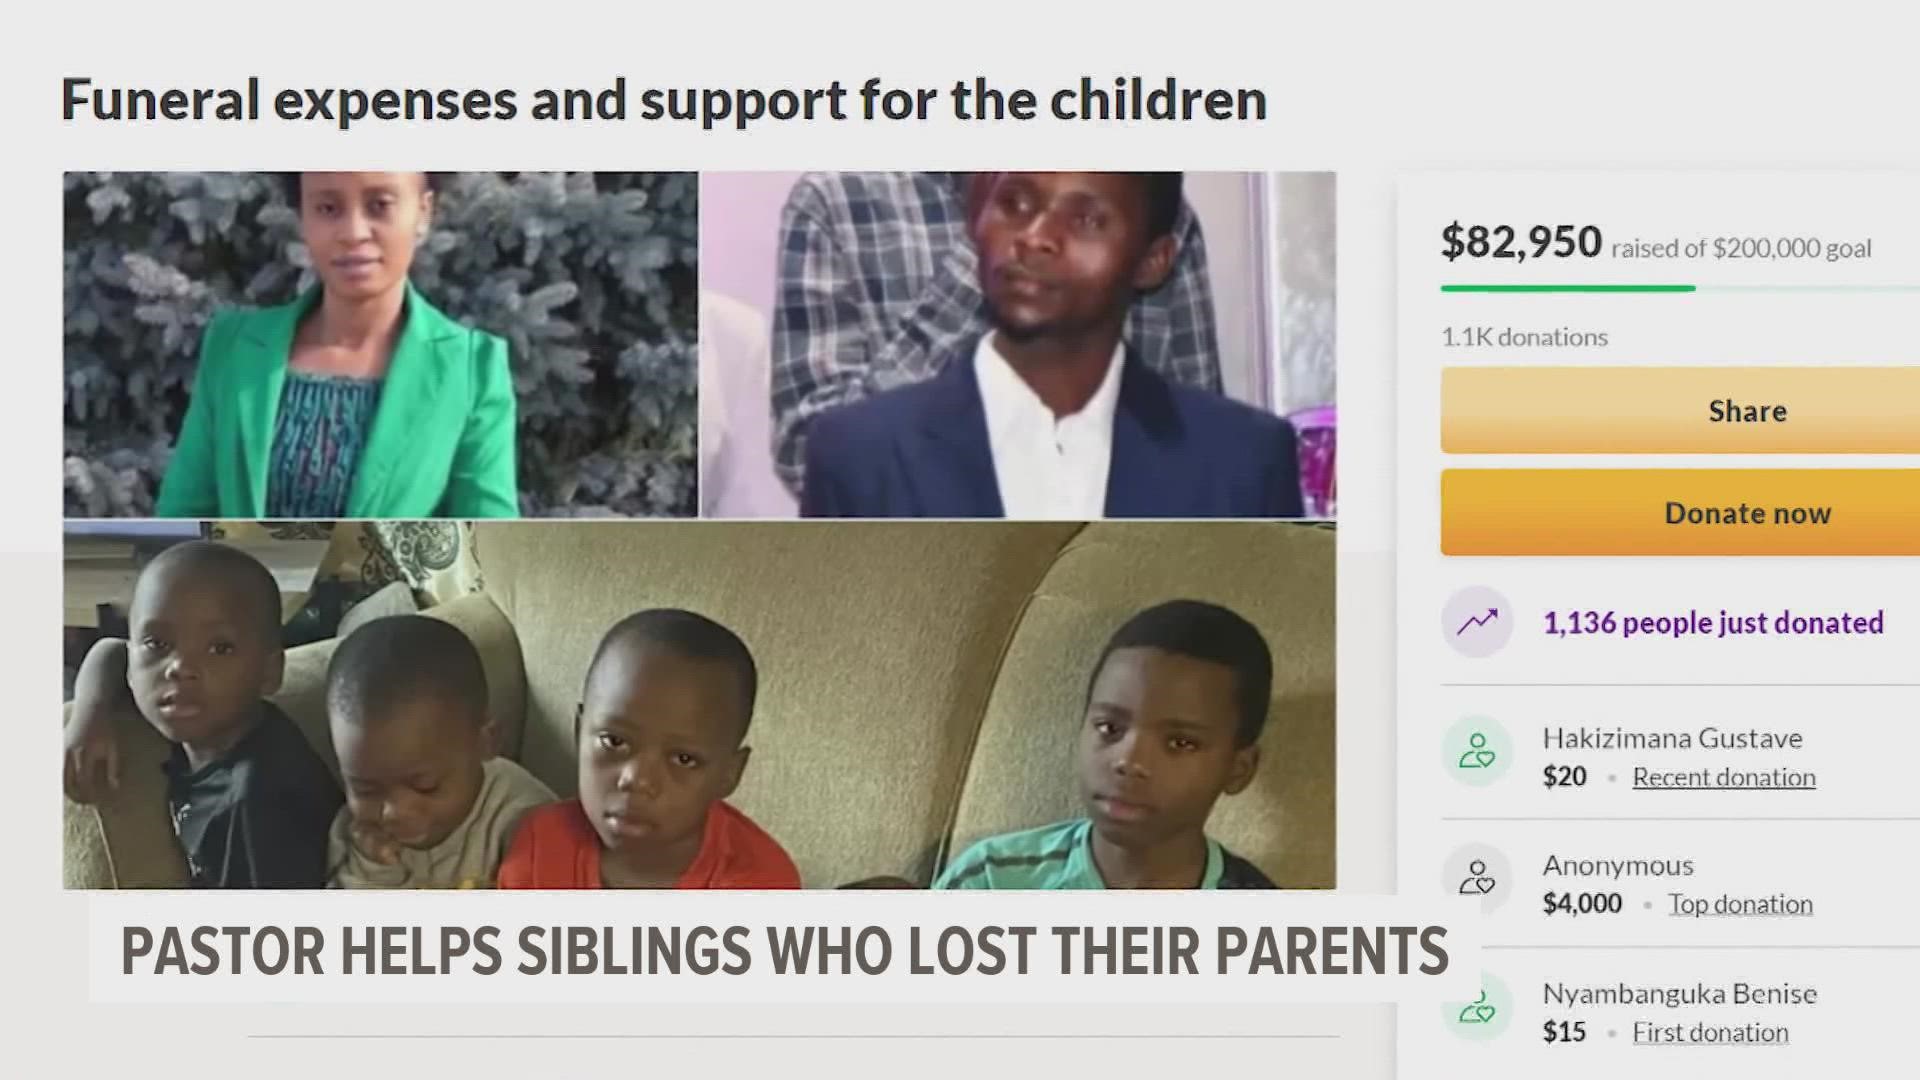 A pastor in metro Des Moines is raising funds to help five siblings whose parents recently died.